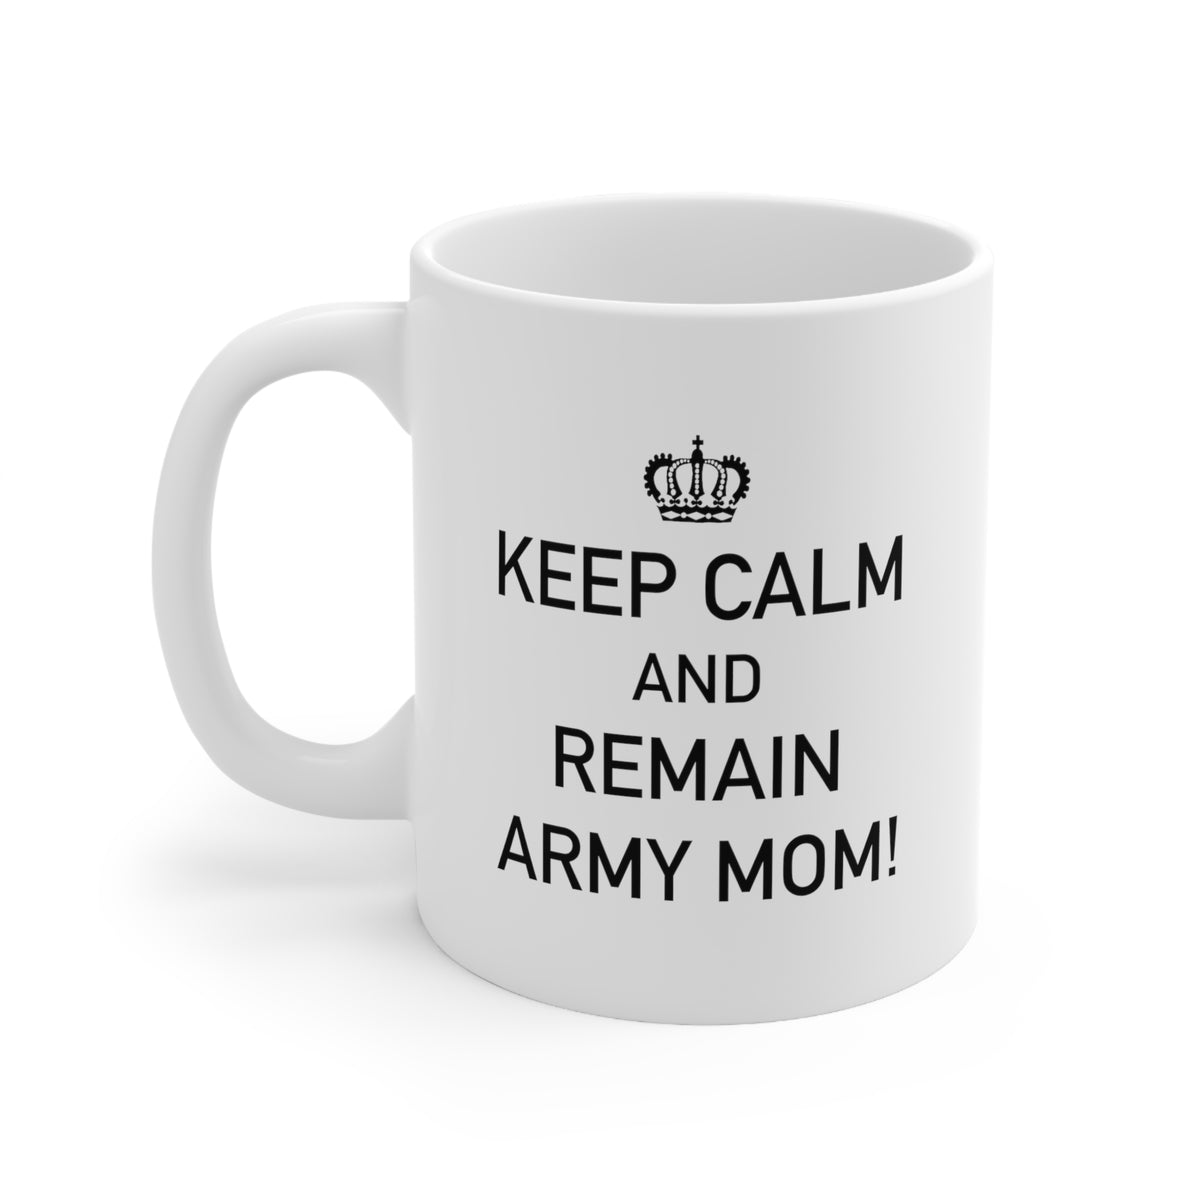 Army Mom Gifts - Keep Calm And Remain Army Mom! - Perfect Mugs For Men & Women